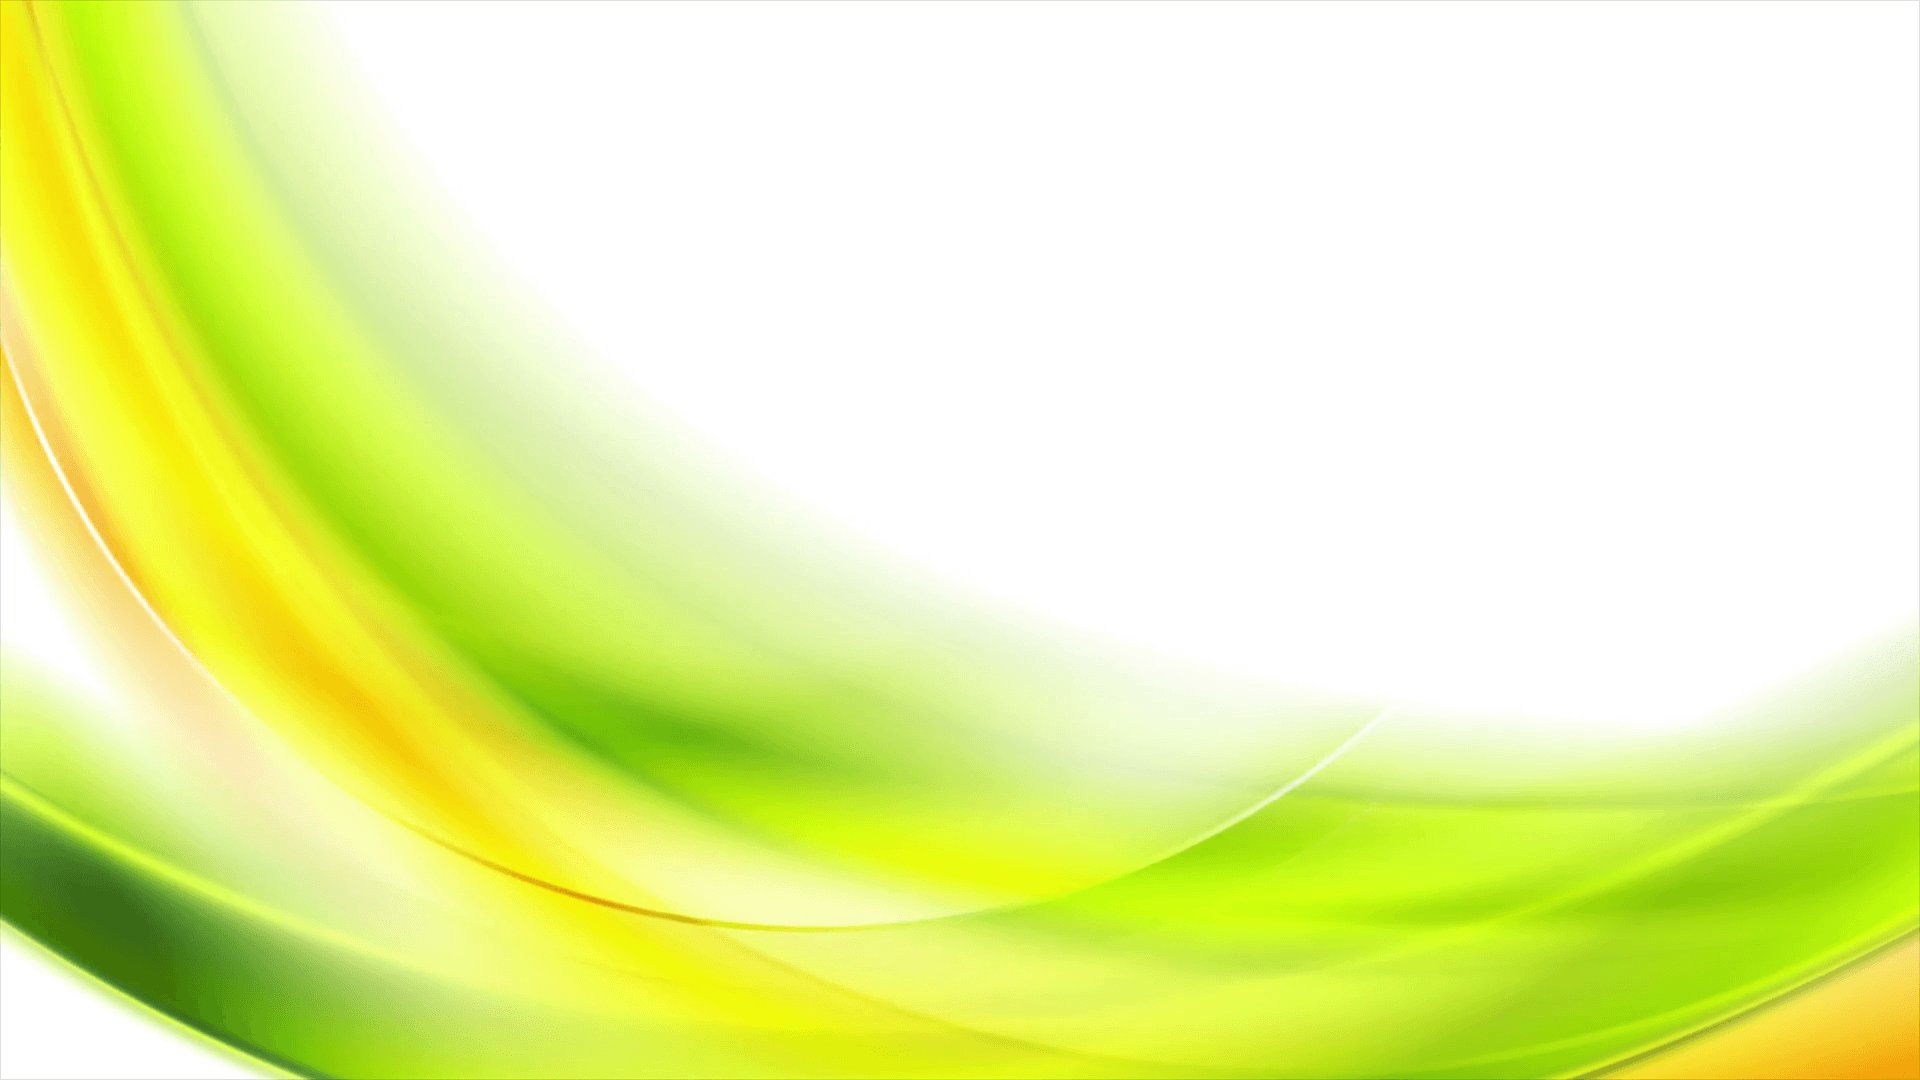 Green Background Images Hq - Wallpaper Cave